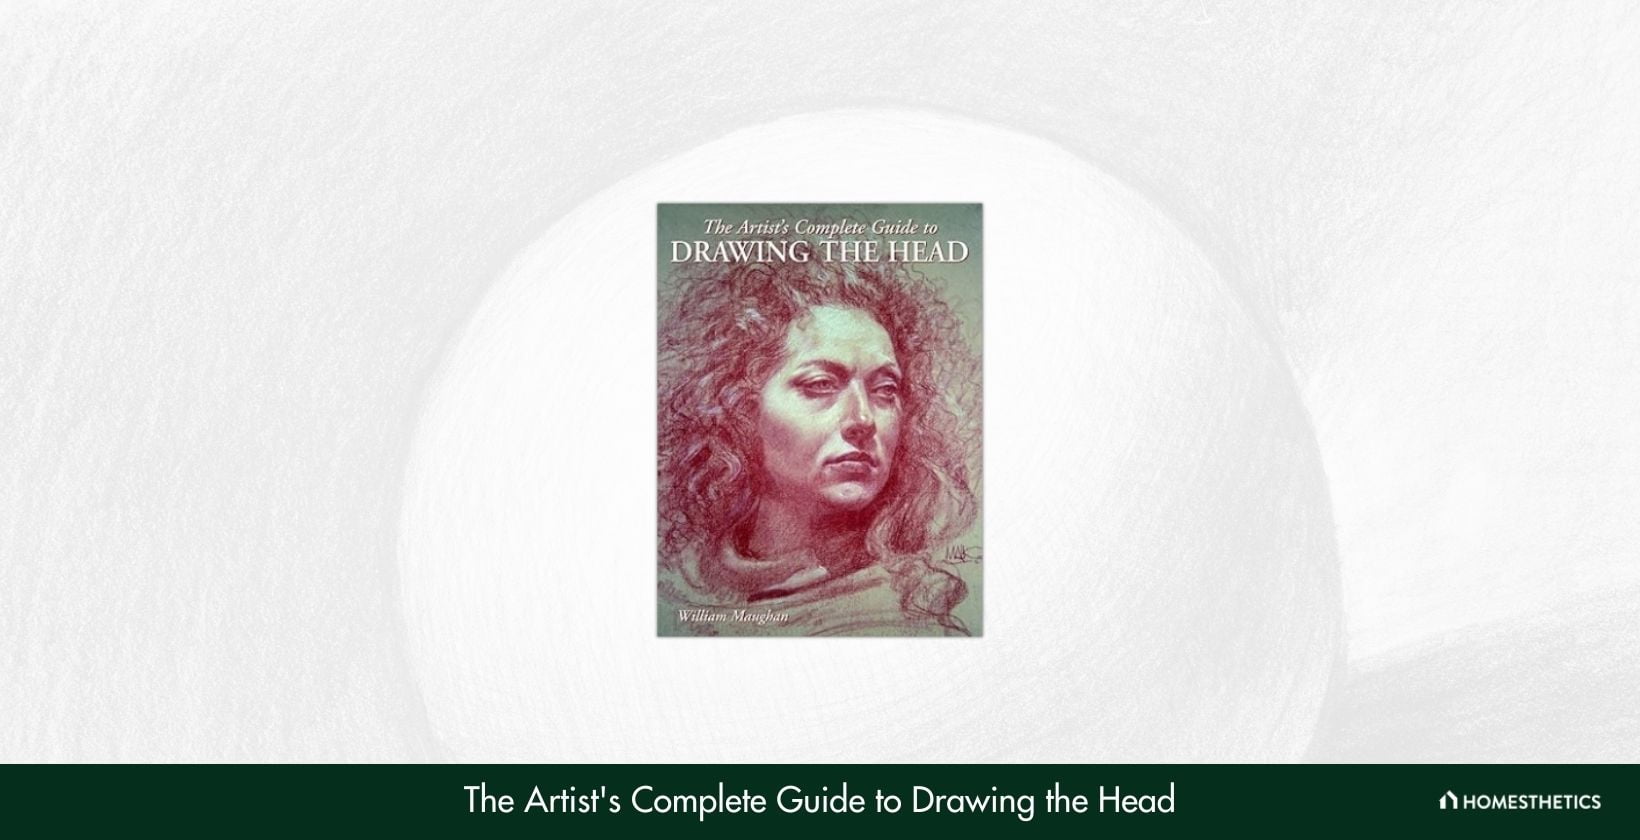 The Artists Complete Guide to Drawing the Head by William Maughan